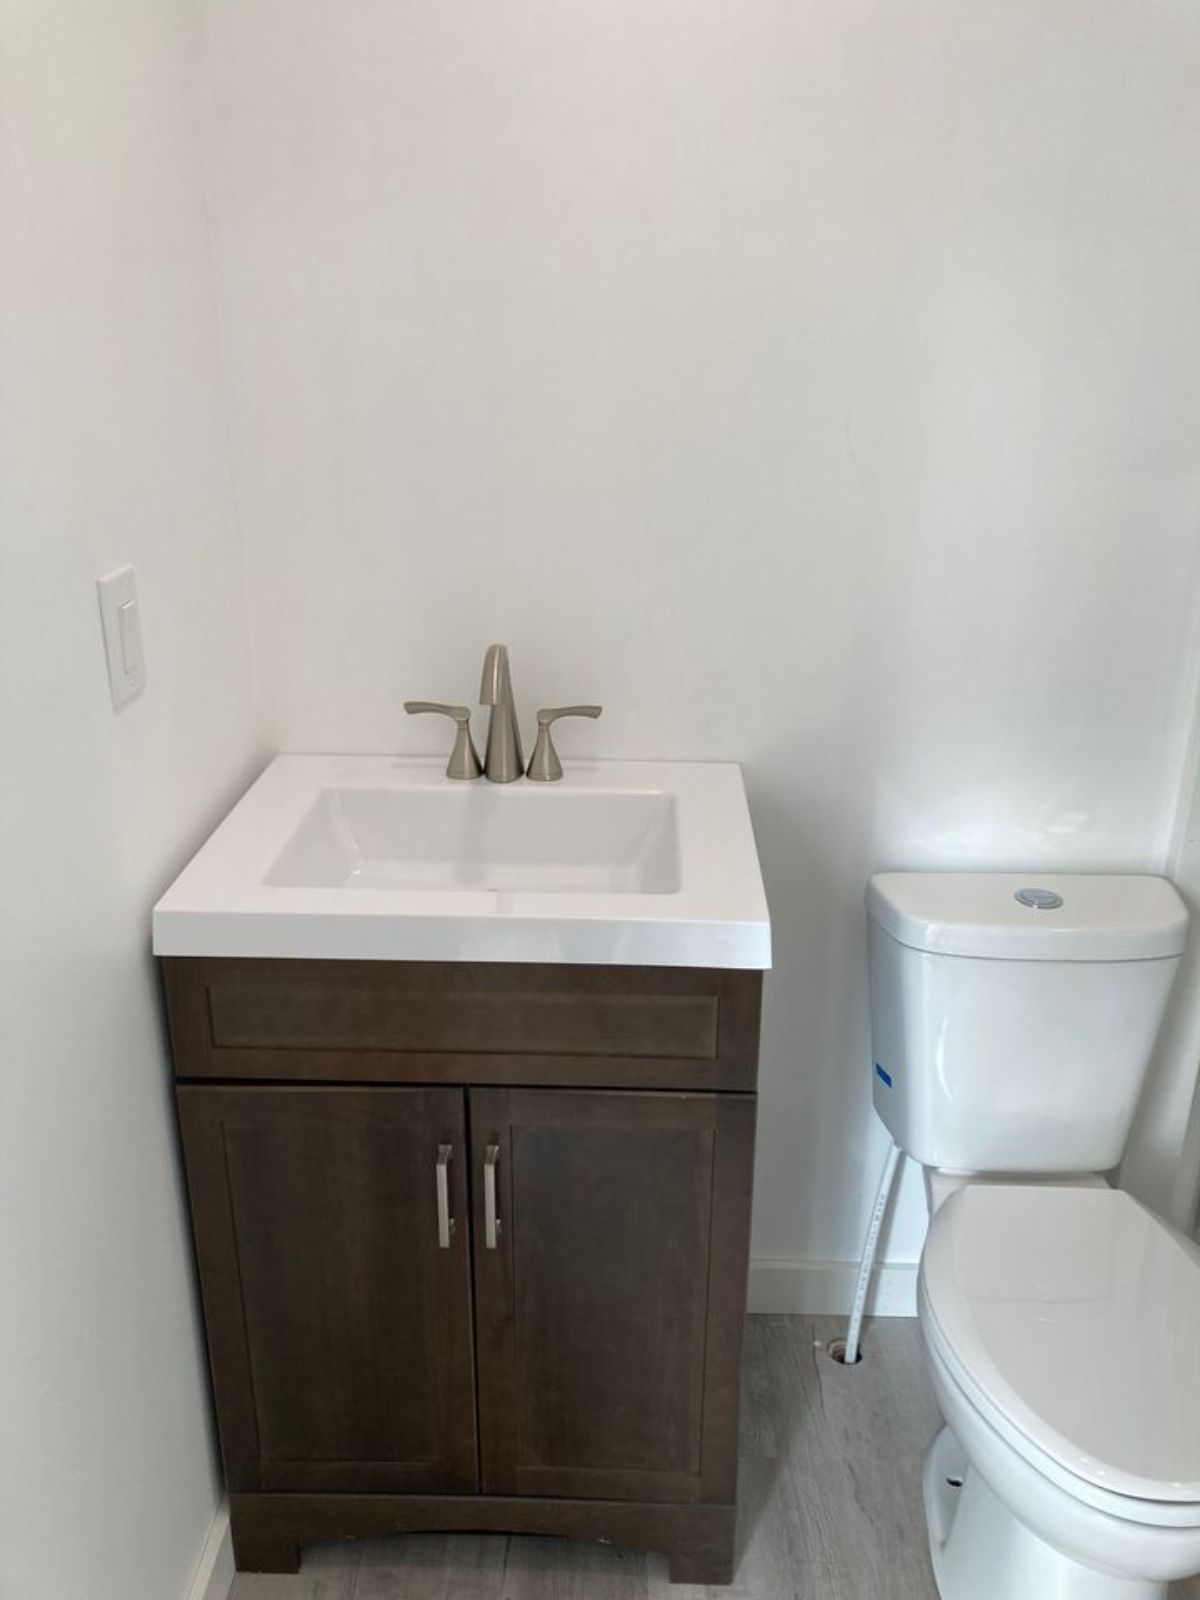 Standard toilet, Sink with vanity in bathroom of 20' Small Container Home